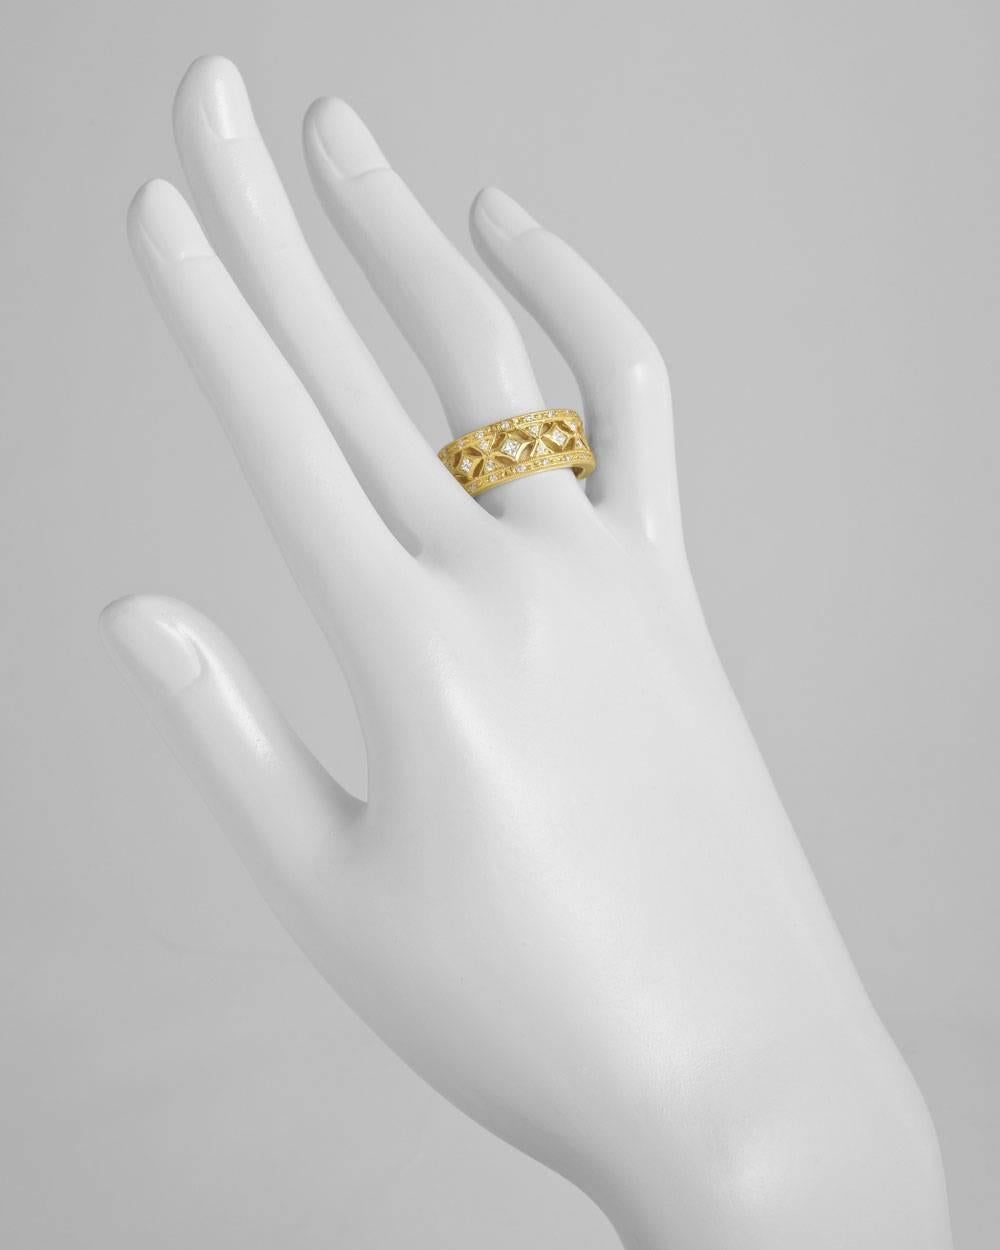 Wide openwork band ring in 18k yellow gold. Square and round-cut diamonds weighing 0.90 total carats. 9mm band width. Designed by Cathy Carmendy. Size 7.